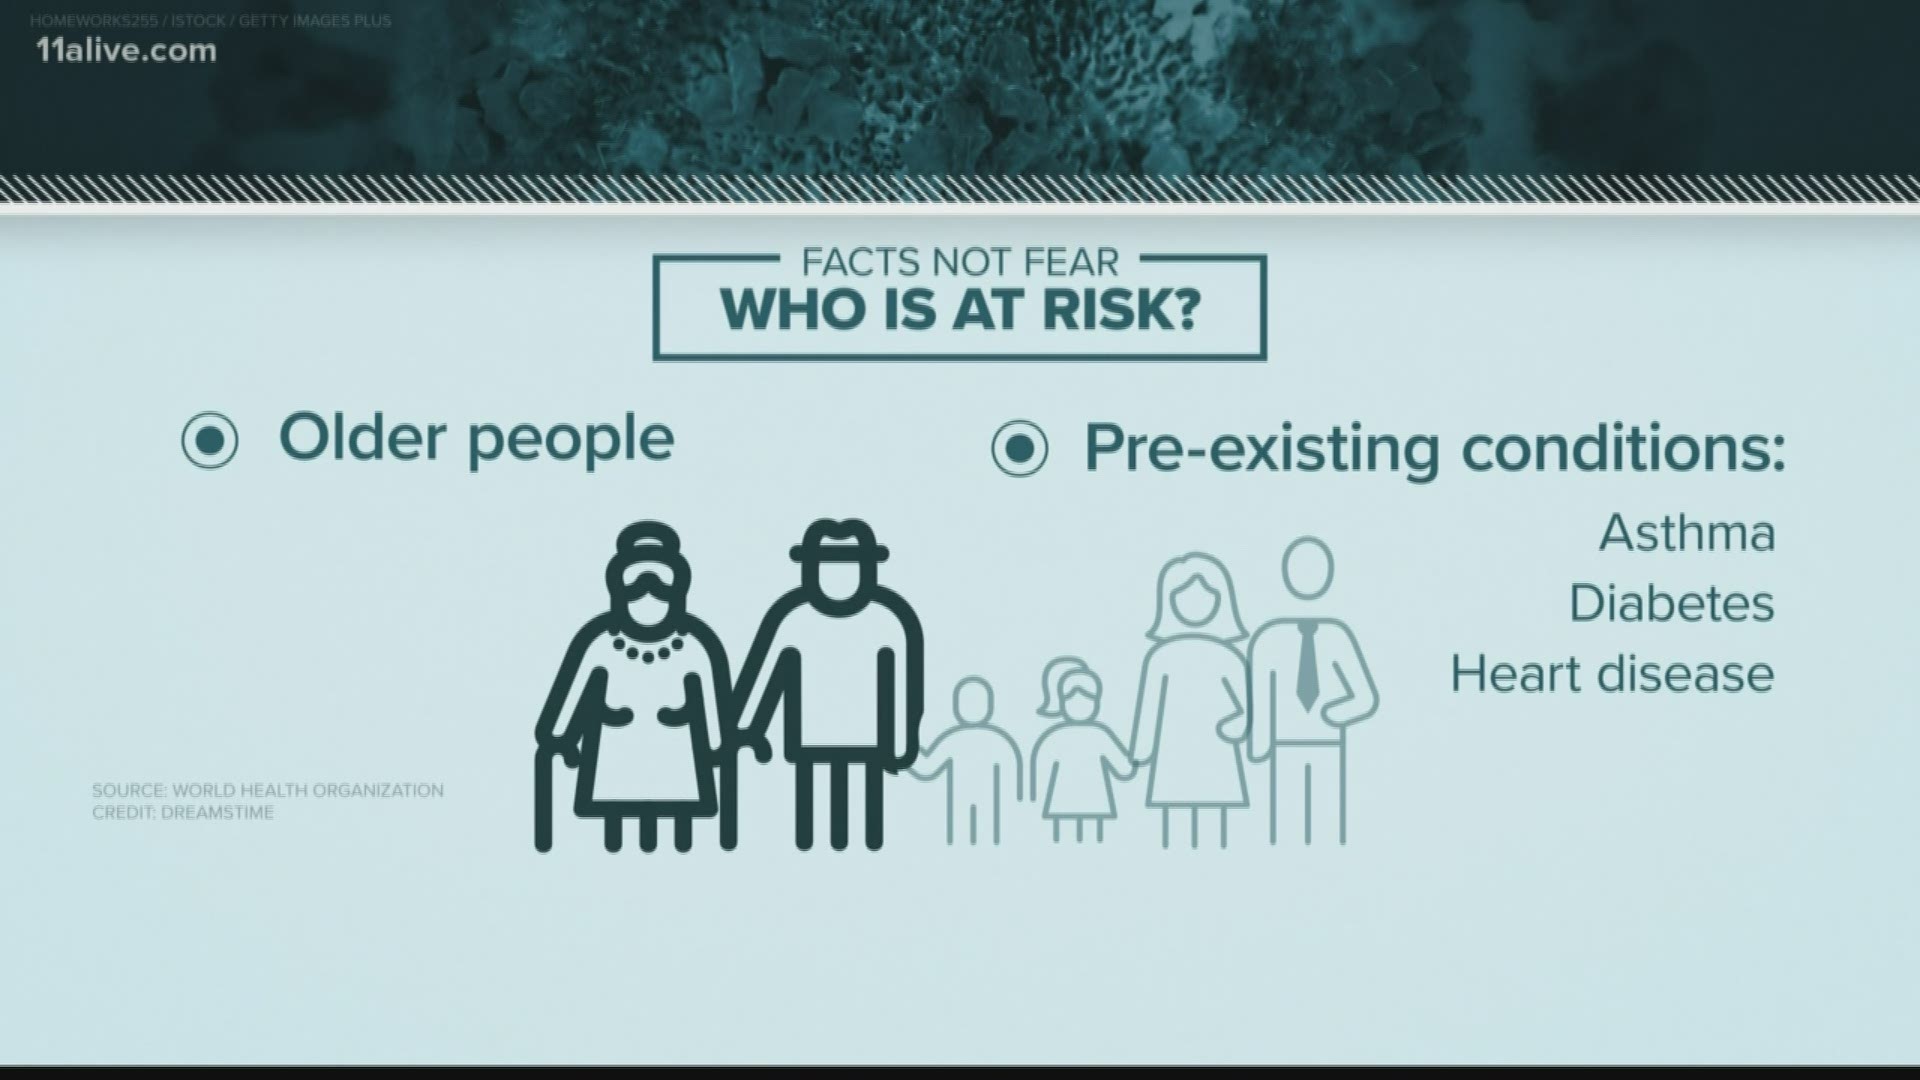 The elderly and those with pre-existing conditions are at most risk of the coronavirus.